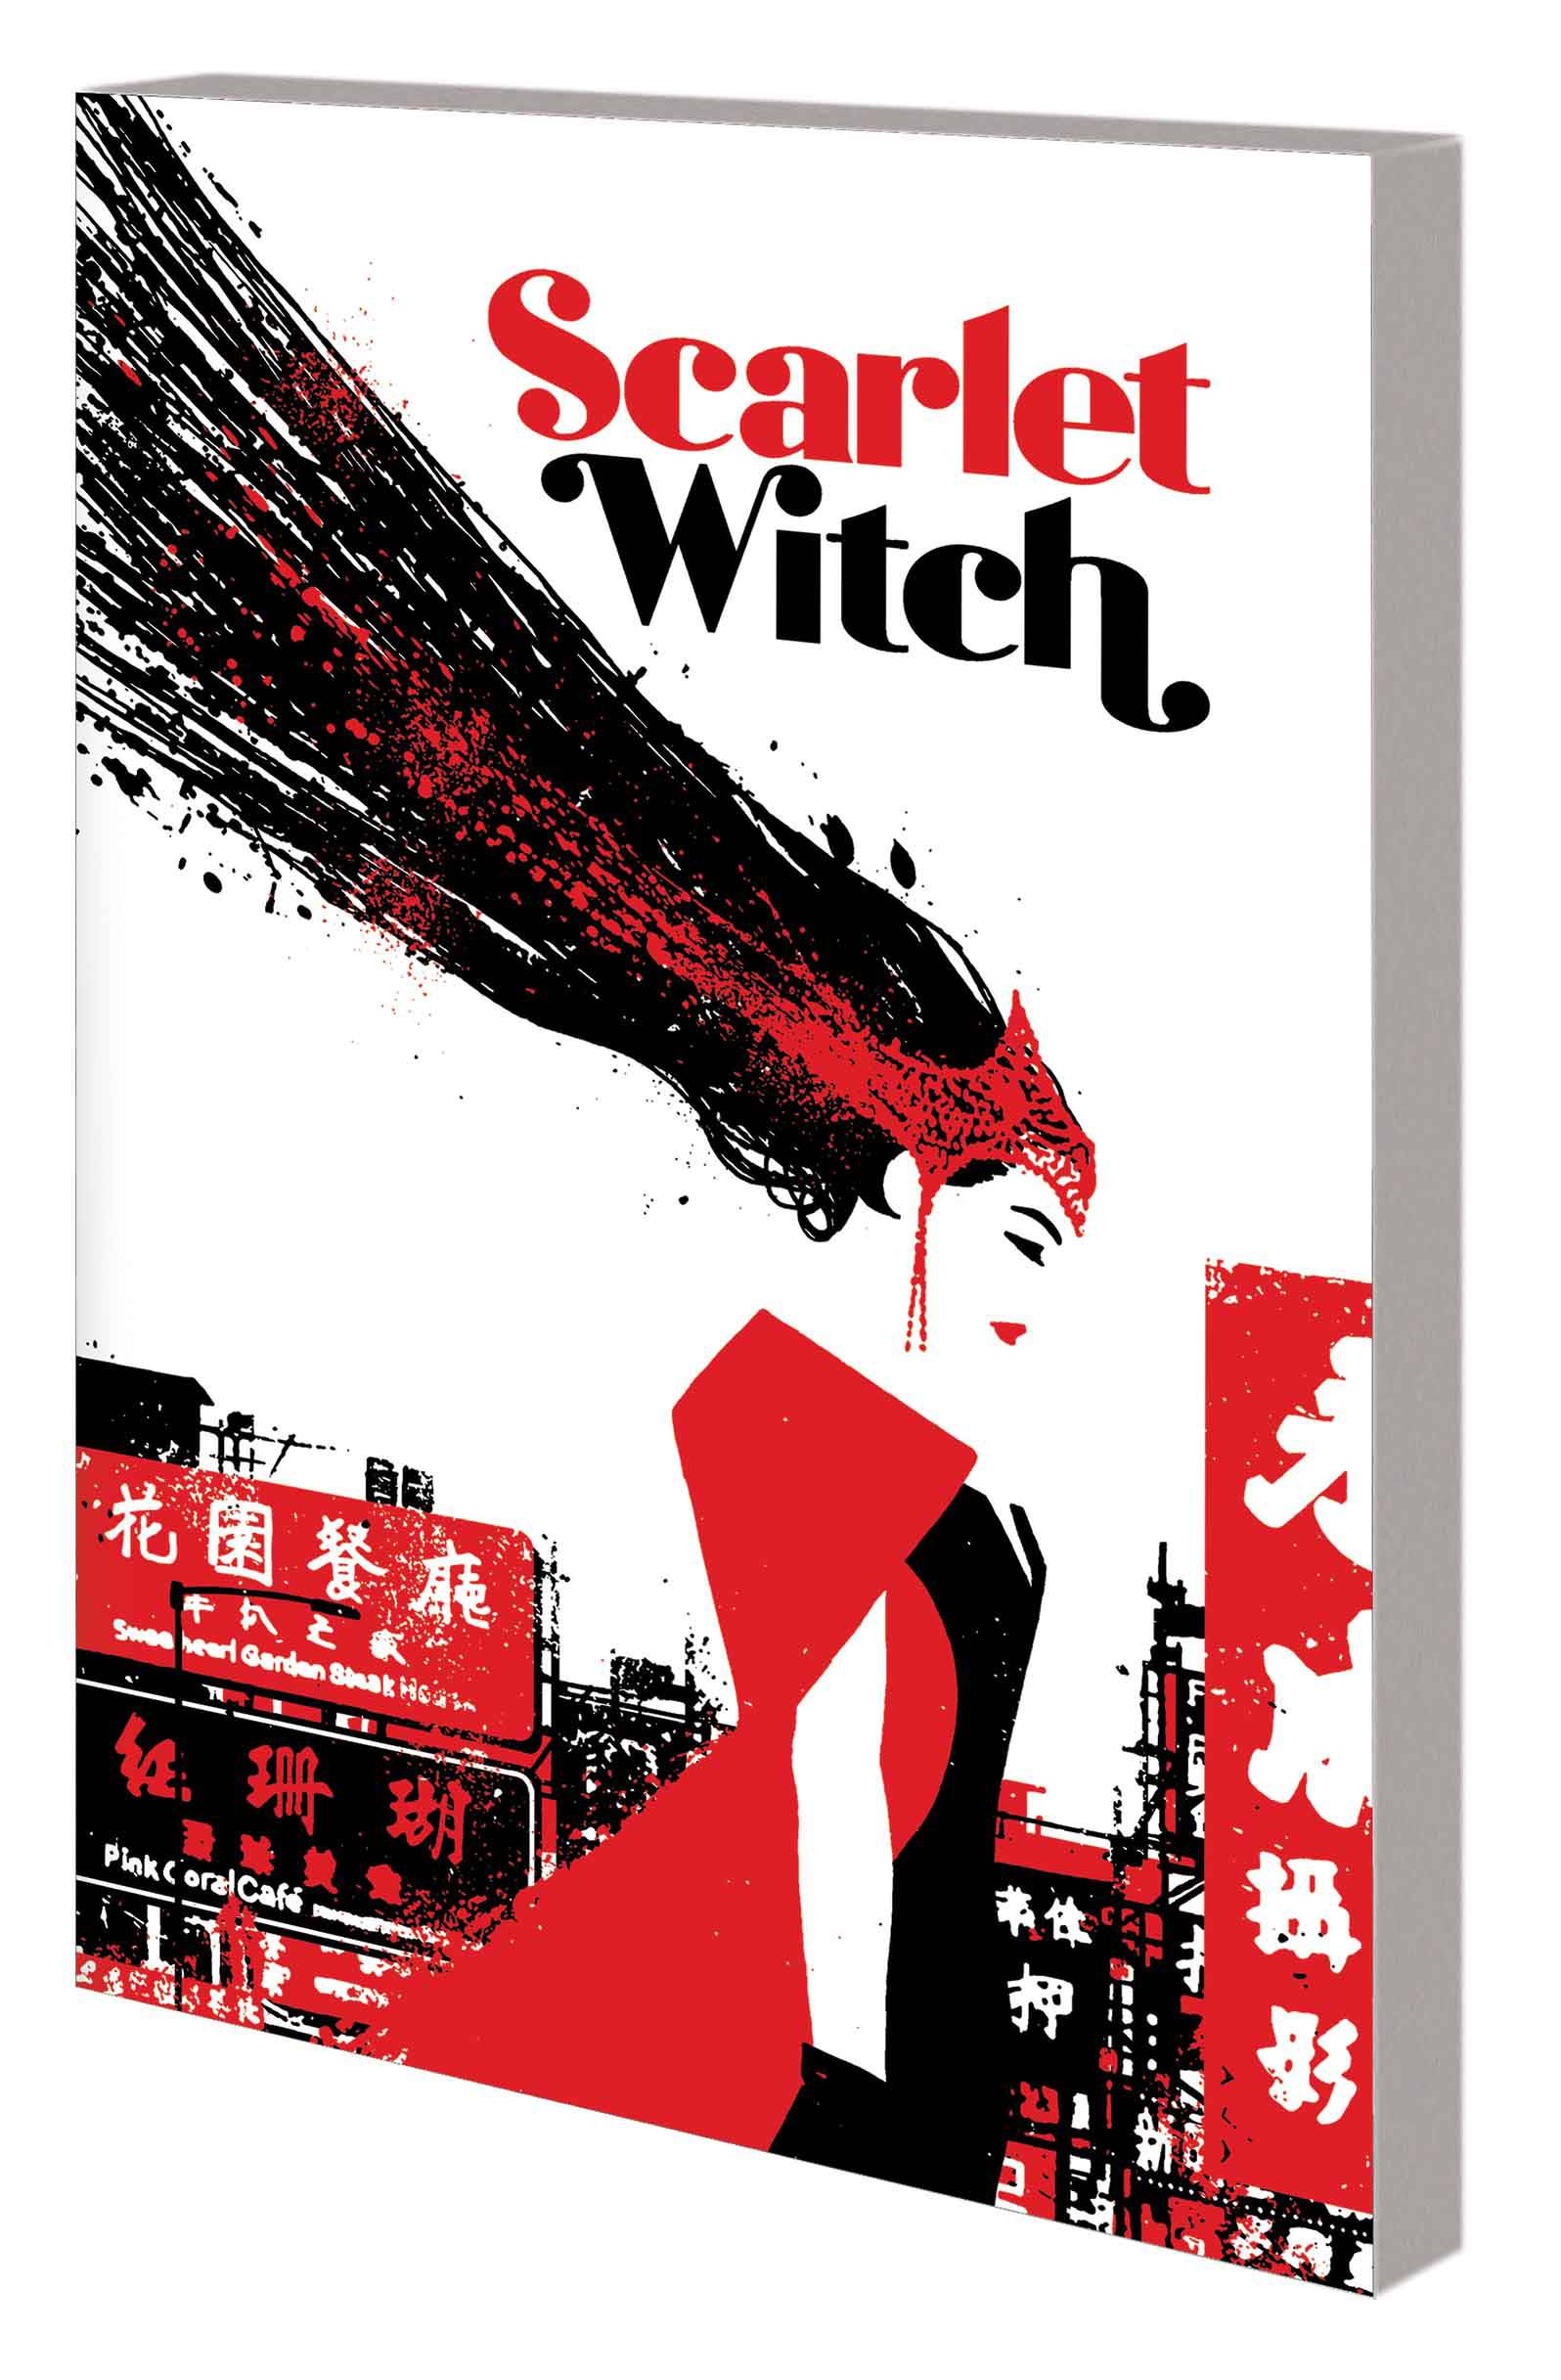 Scarlet Witch Graphic Novel Volume 2 World of Witchcraft